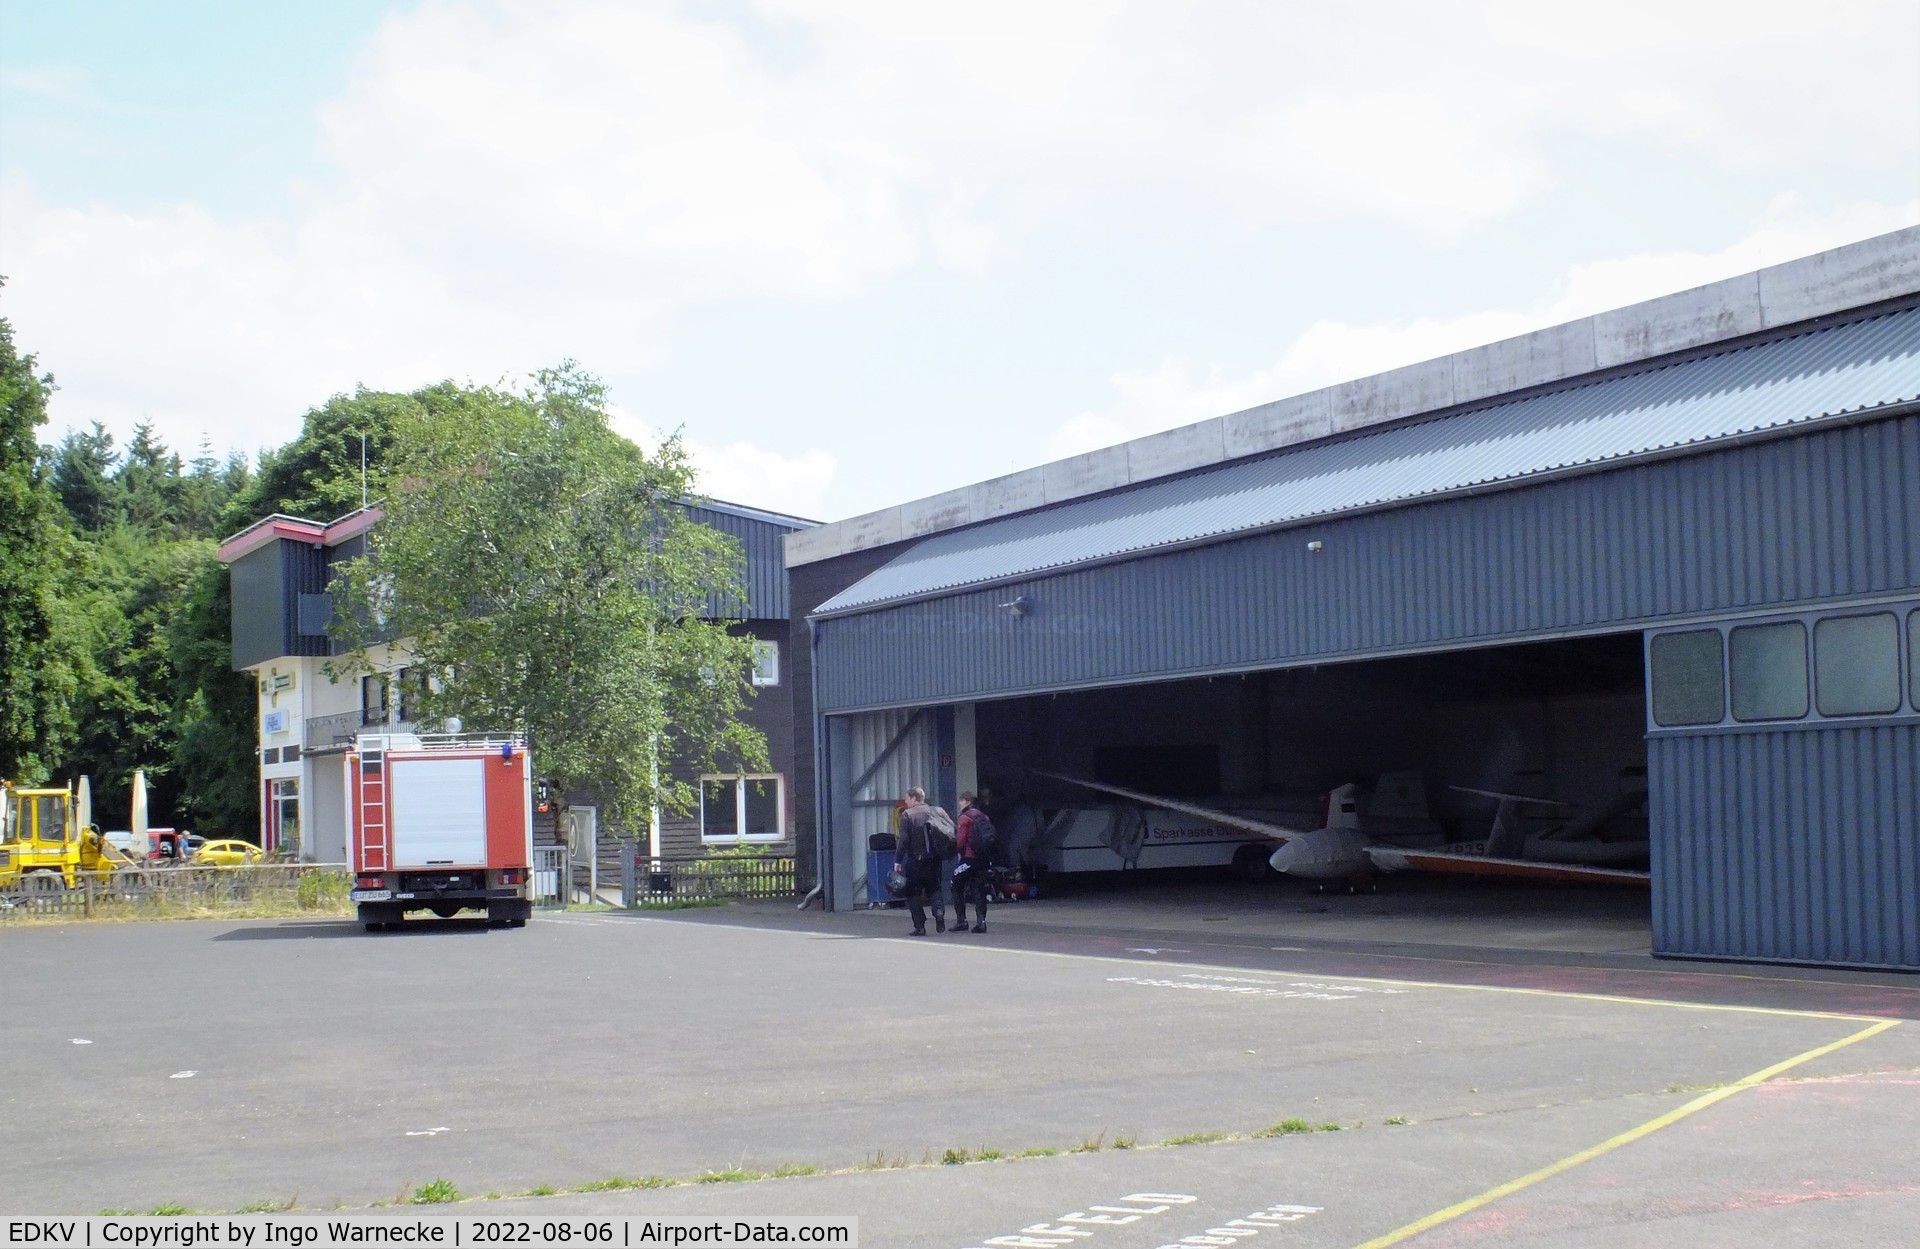 Dahlemer Binz Airport, Dahlem Germany (EDKV) - hangar next to airfield hotel and restaurant at Dahlemer Binz airfield